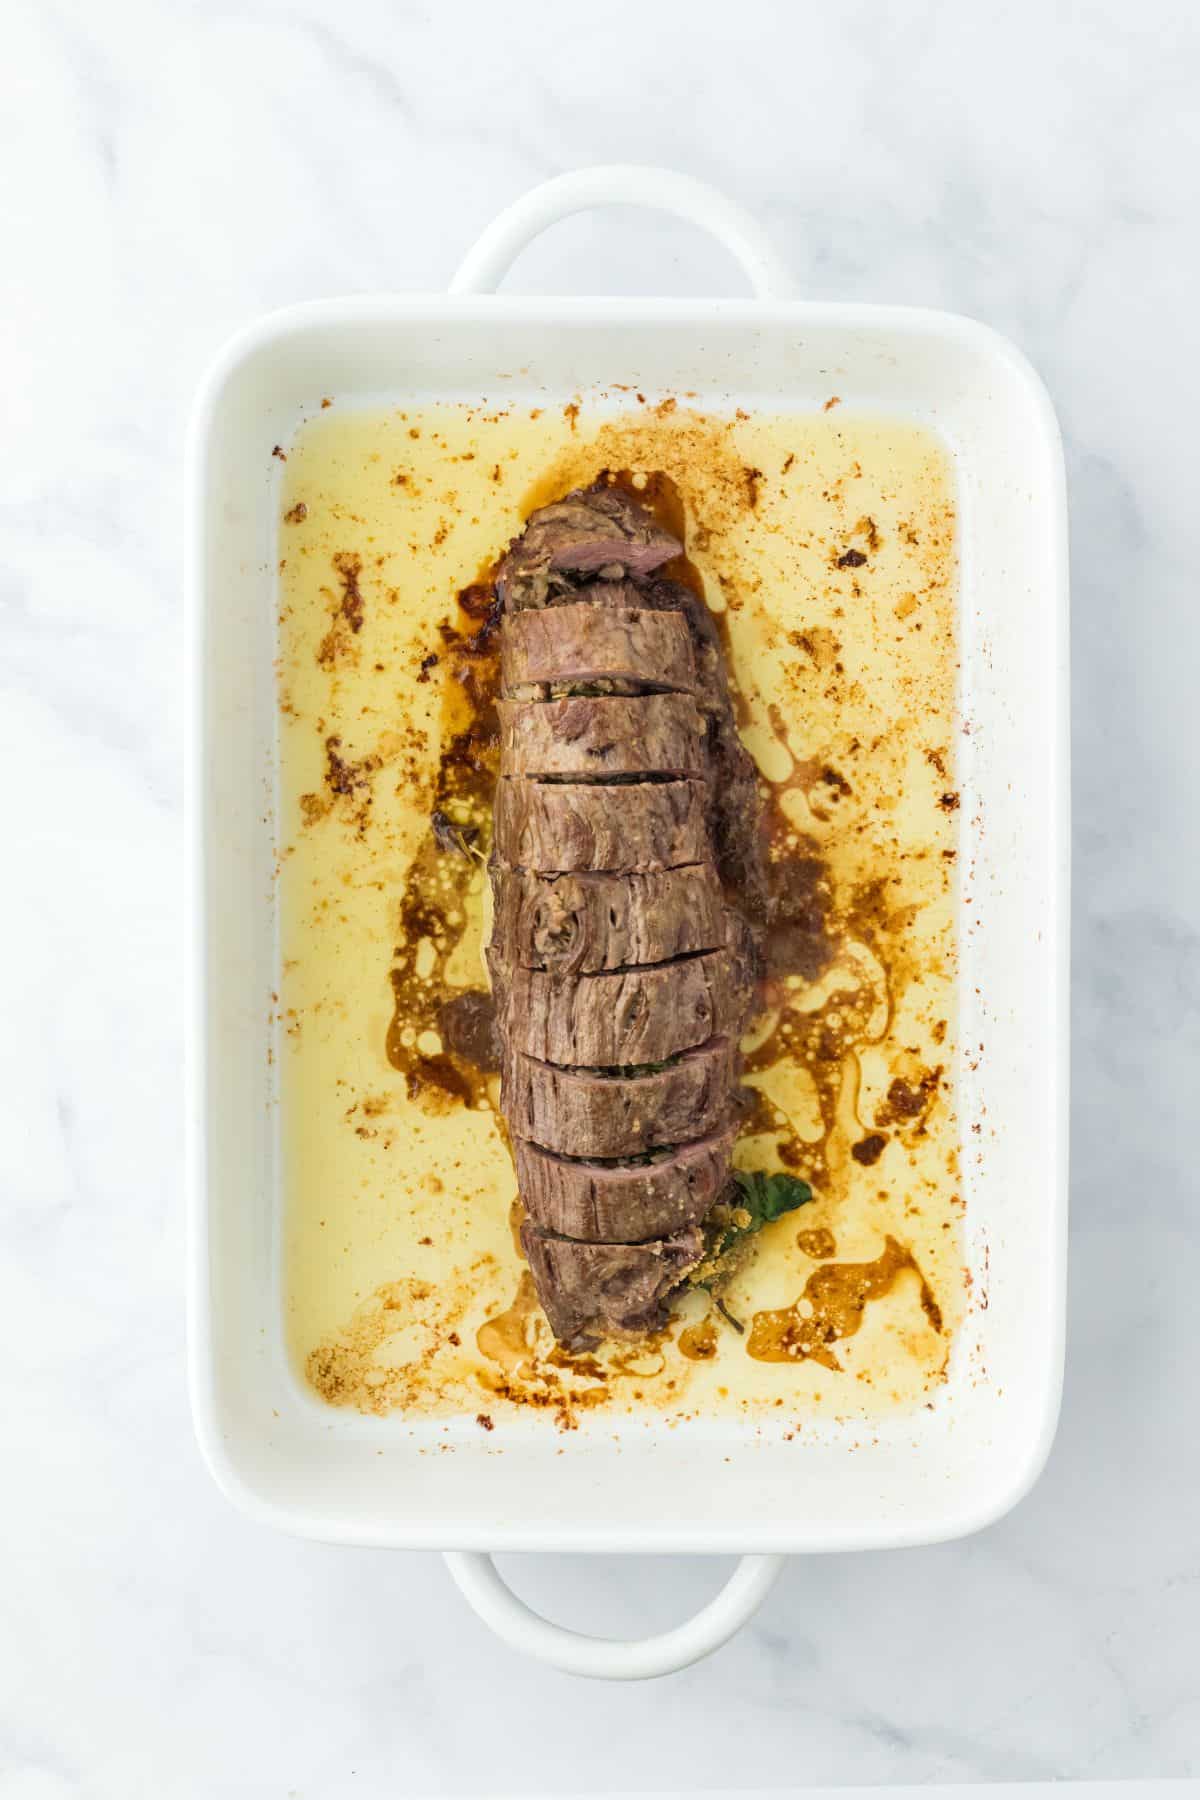 A whole stuffed flank steak sliced and placed in a white baking dish, with cooking juices around it, set on a marble countertop